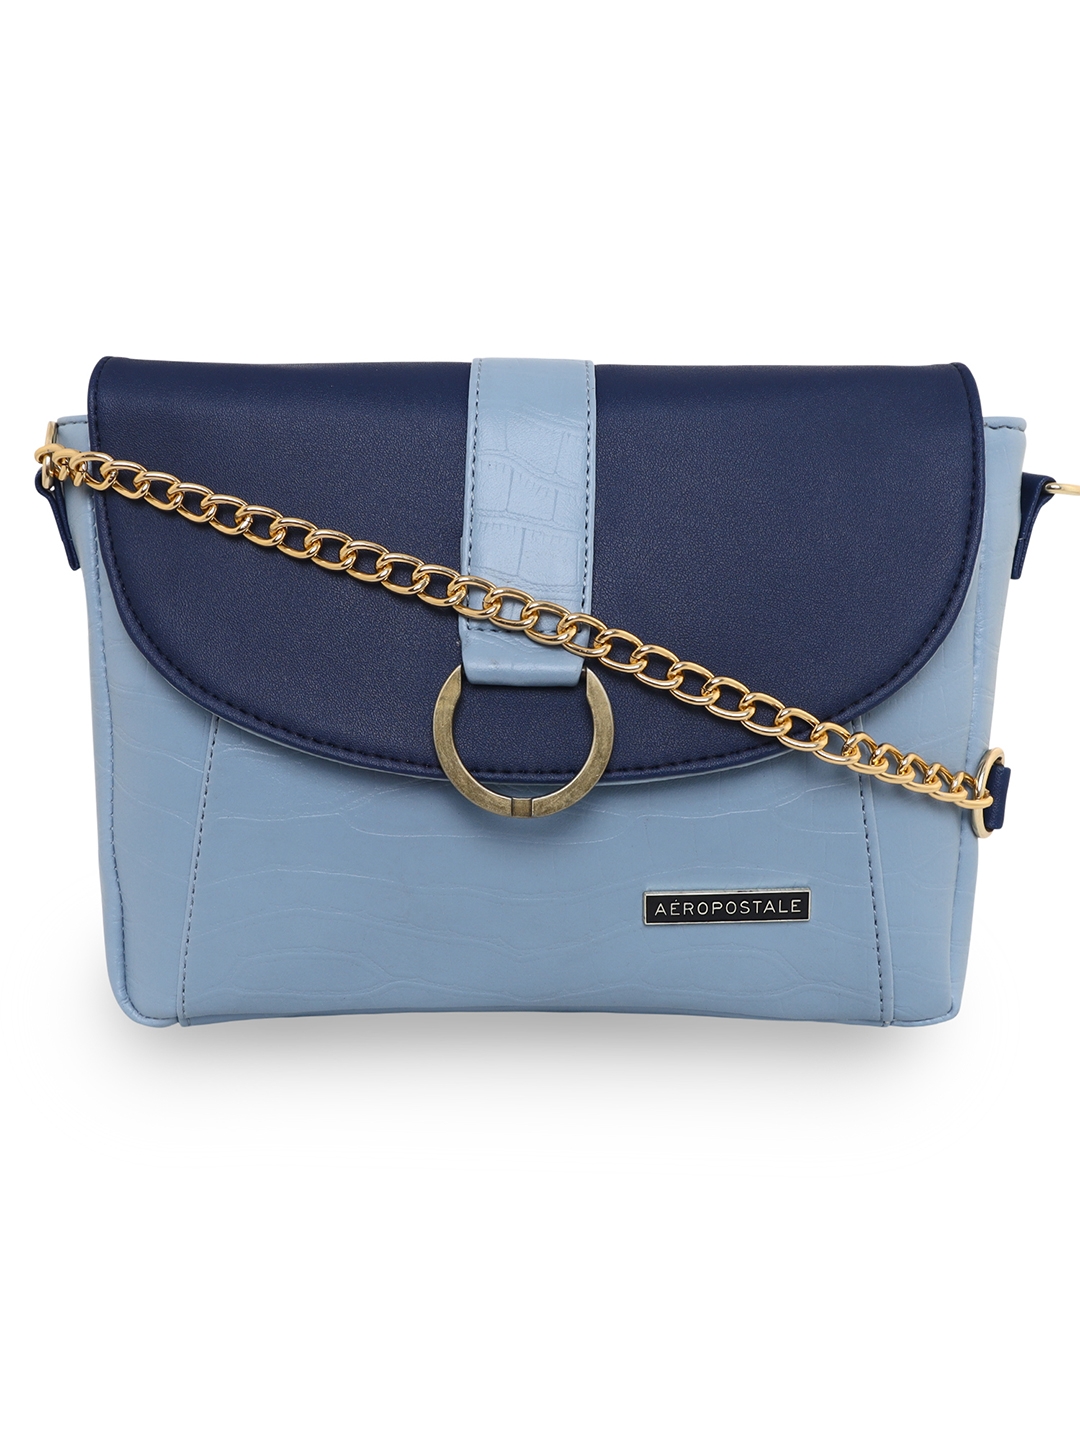 Aeropostale | Aeropostale Textured Amy Crossbody Fashion Bags For Women Stylish Magnetic Flap Button With Fancy Handware Vegan Leather Navy